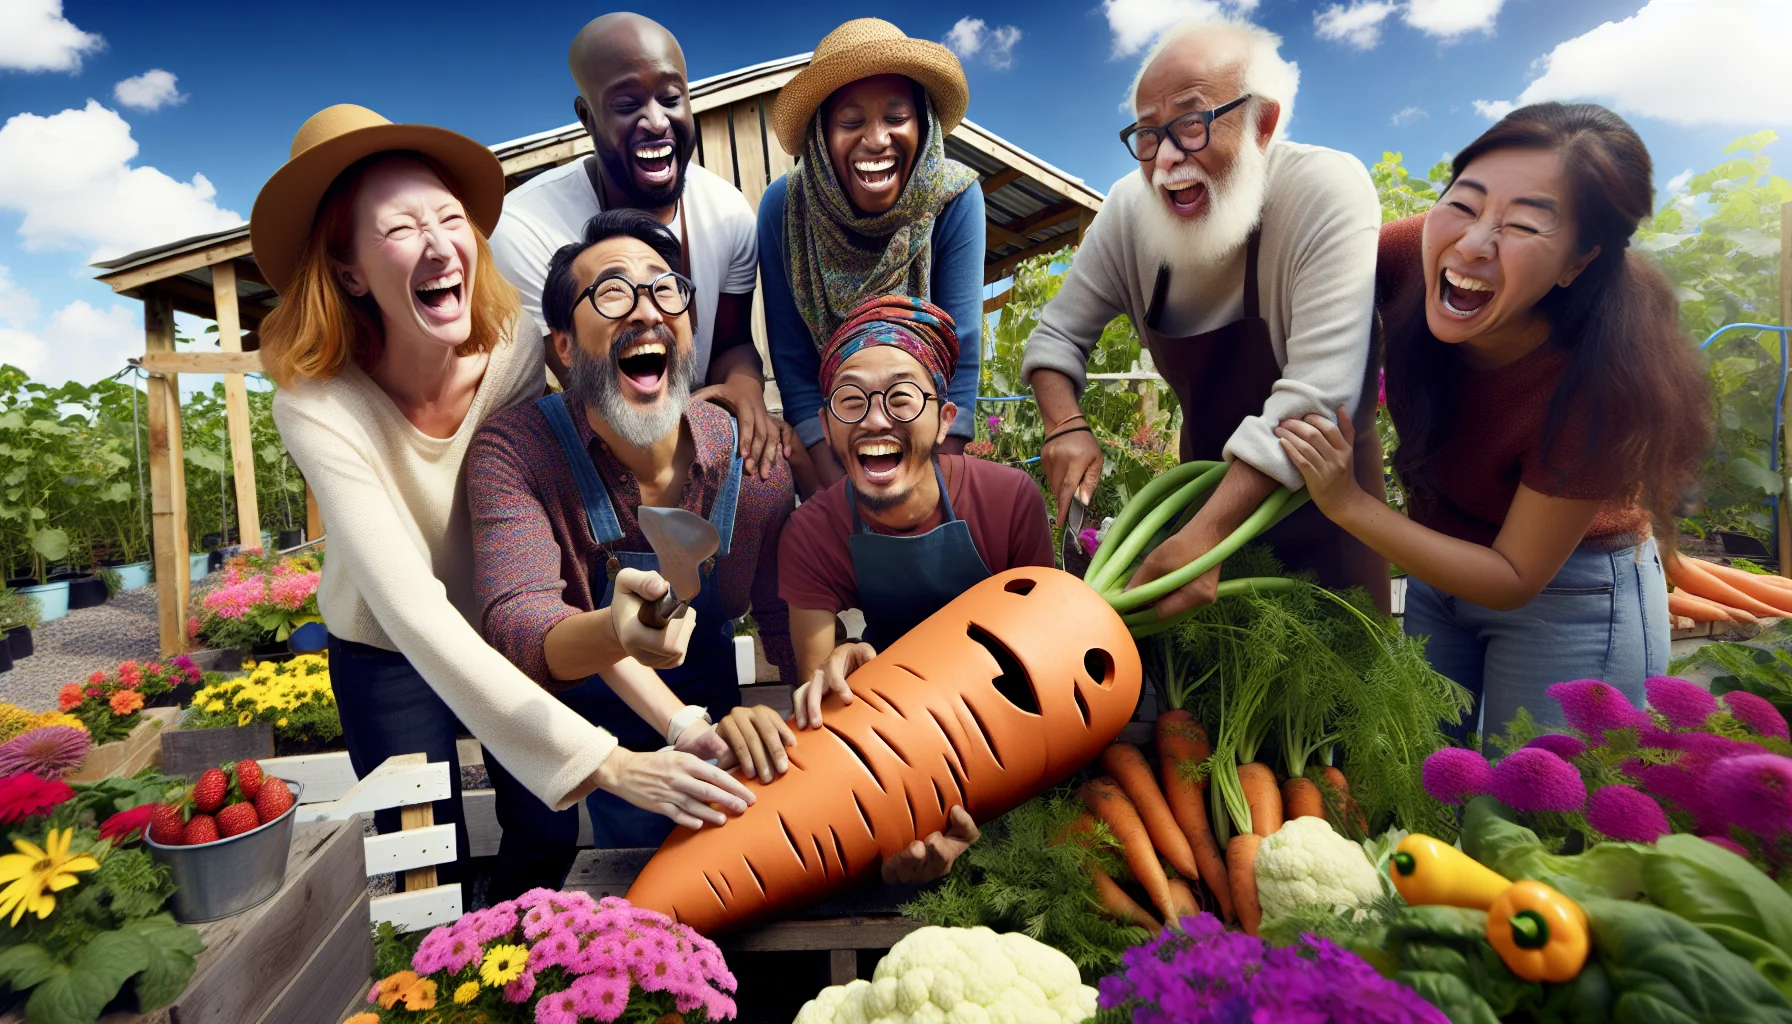 Create an entertaining and colorful image of a community garden design, humming with vibrant flowers and fresh vegetables. Picture a comical situation where a group of people from diverse backgrounds, including an East Asian woman, a Black man, a Caucasian elderly man, and a Middle-Eastern teenager are cheerfully engaged in gardening. They are trying to carve a giant carrot into a funny sculpture and laughing heartily, thereby enticing others to get involved in and enjoy the gardening experience.